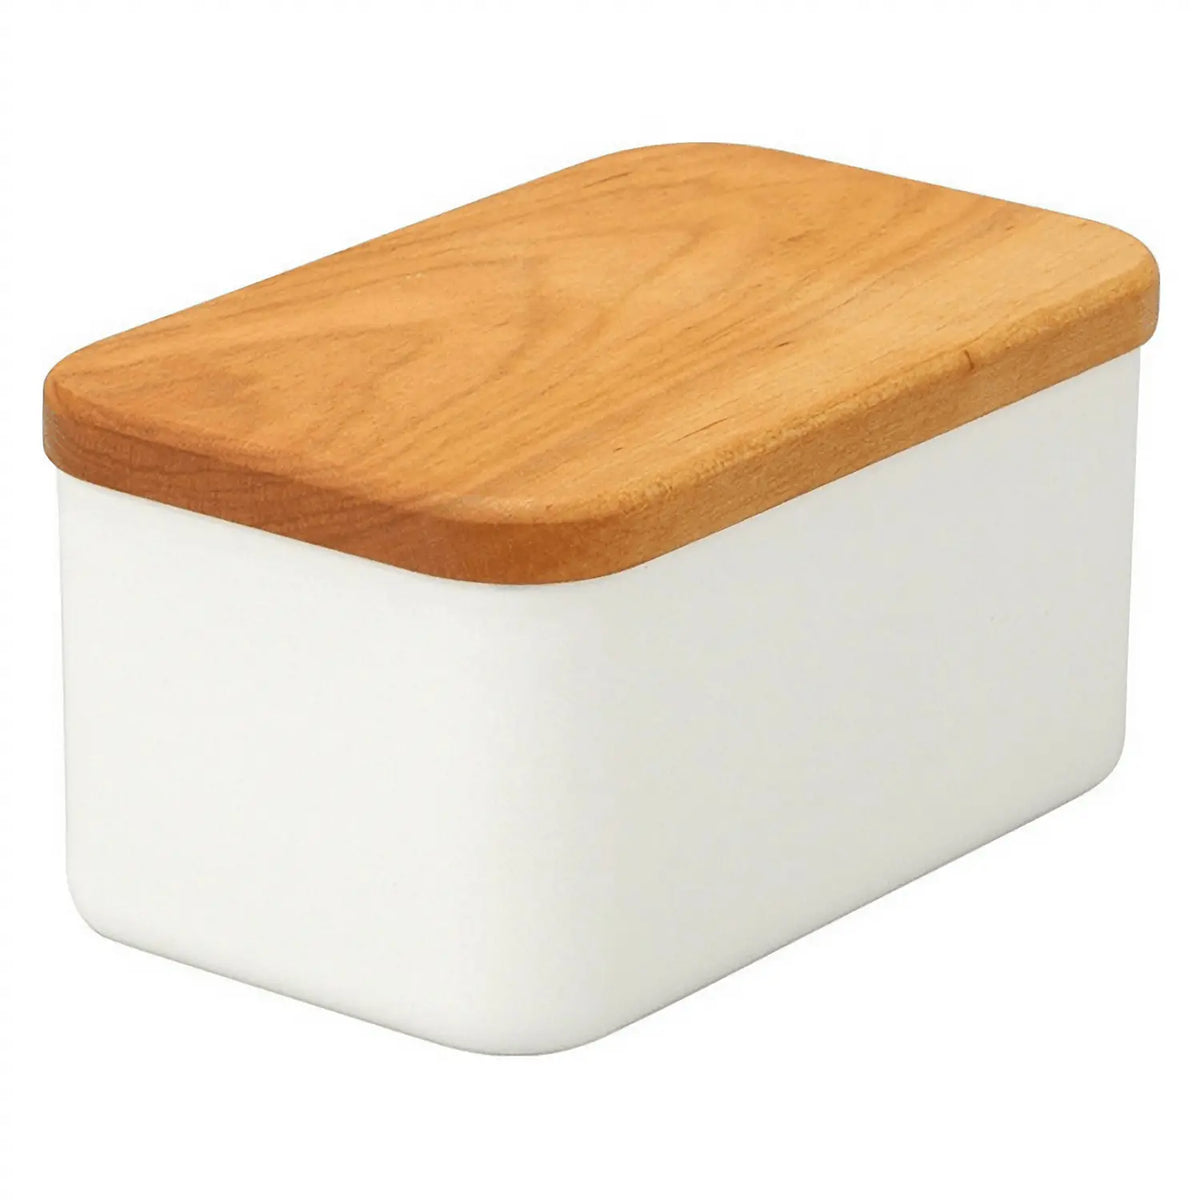 Noda Horo Enamel Butter Dish with Solid Cherry Wood Lid